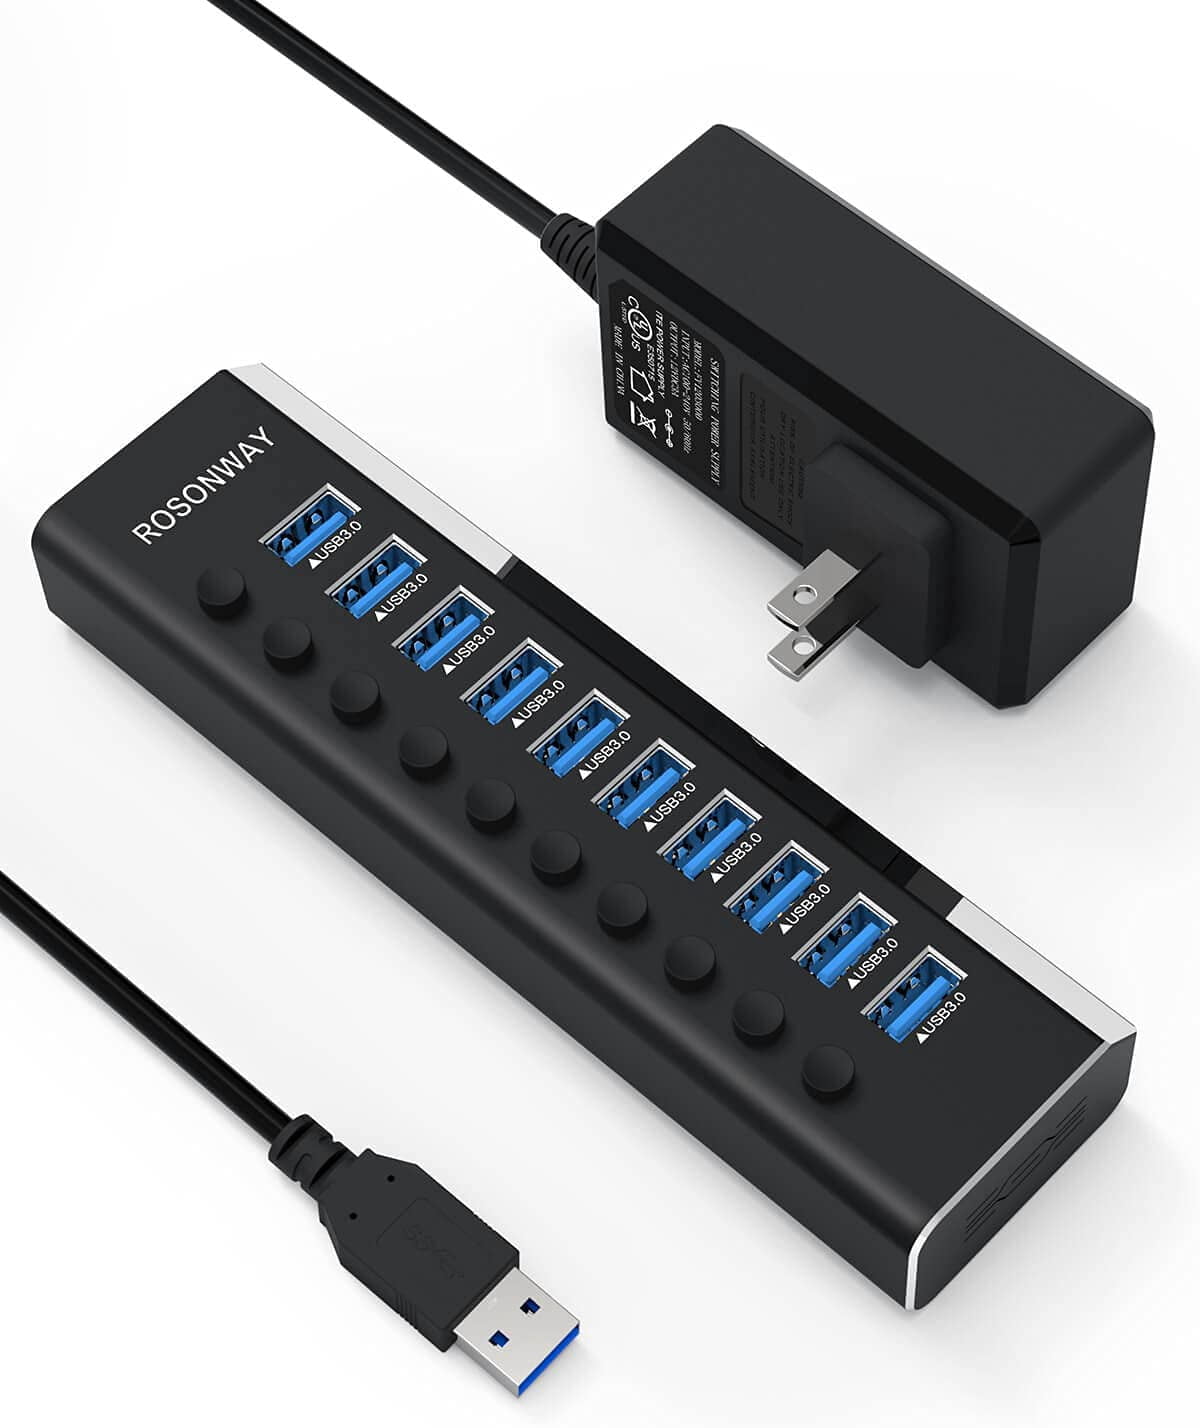 ROSONWAY Aluminum 10 Port 36W Powered USB 3.0 Hub with 12V/3A Power Adapter and Individual On/Off Switches, RSW-A10 -